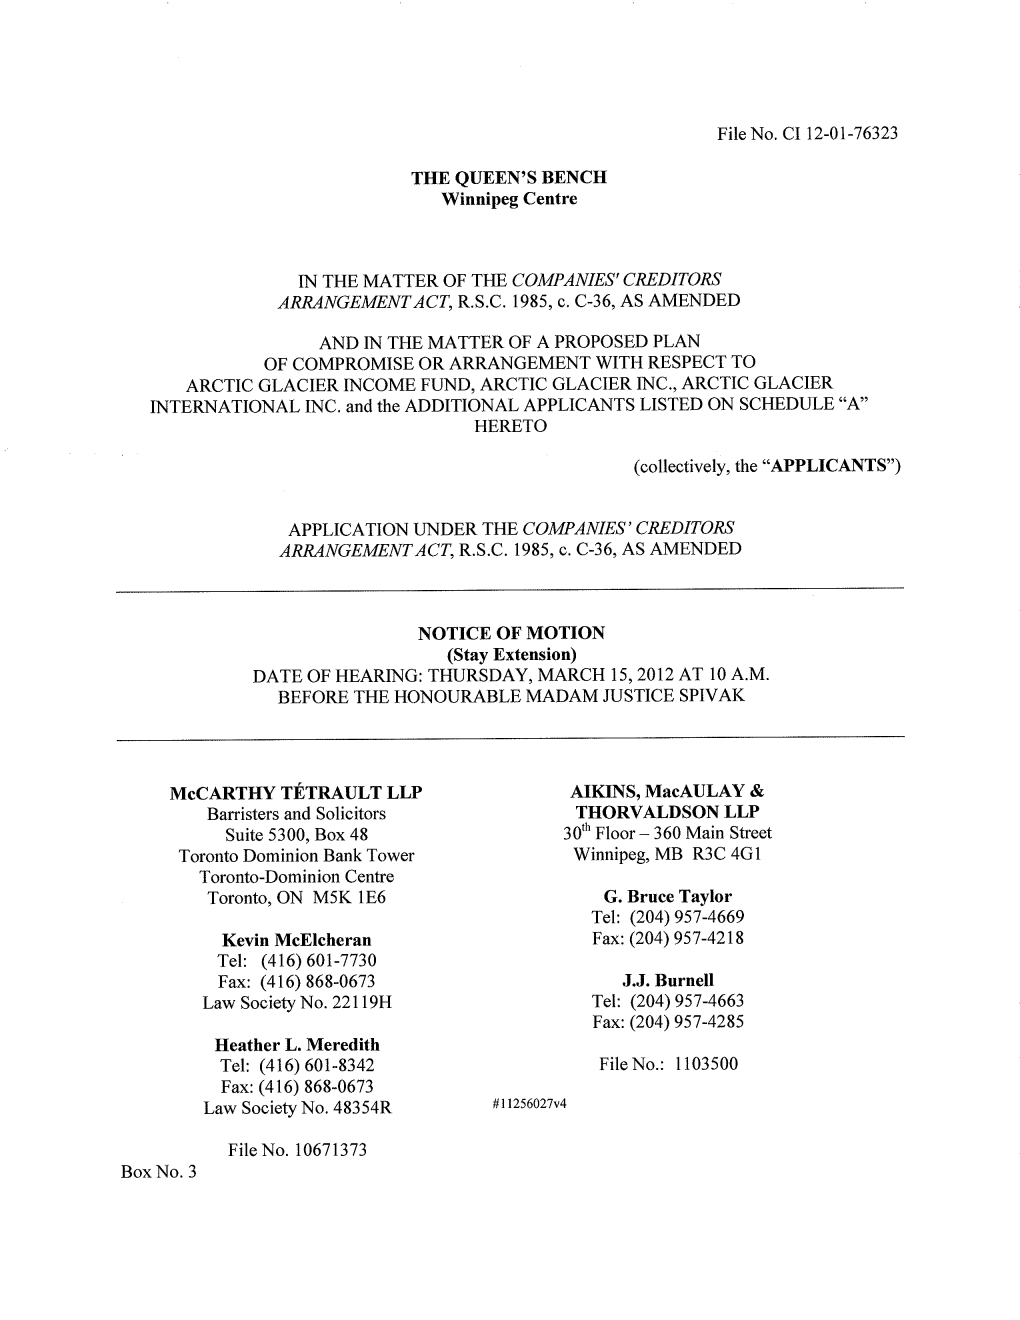 Notice of Motion (March 15 2012).Pdf